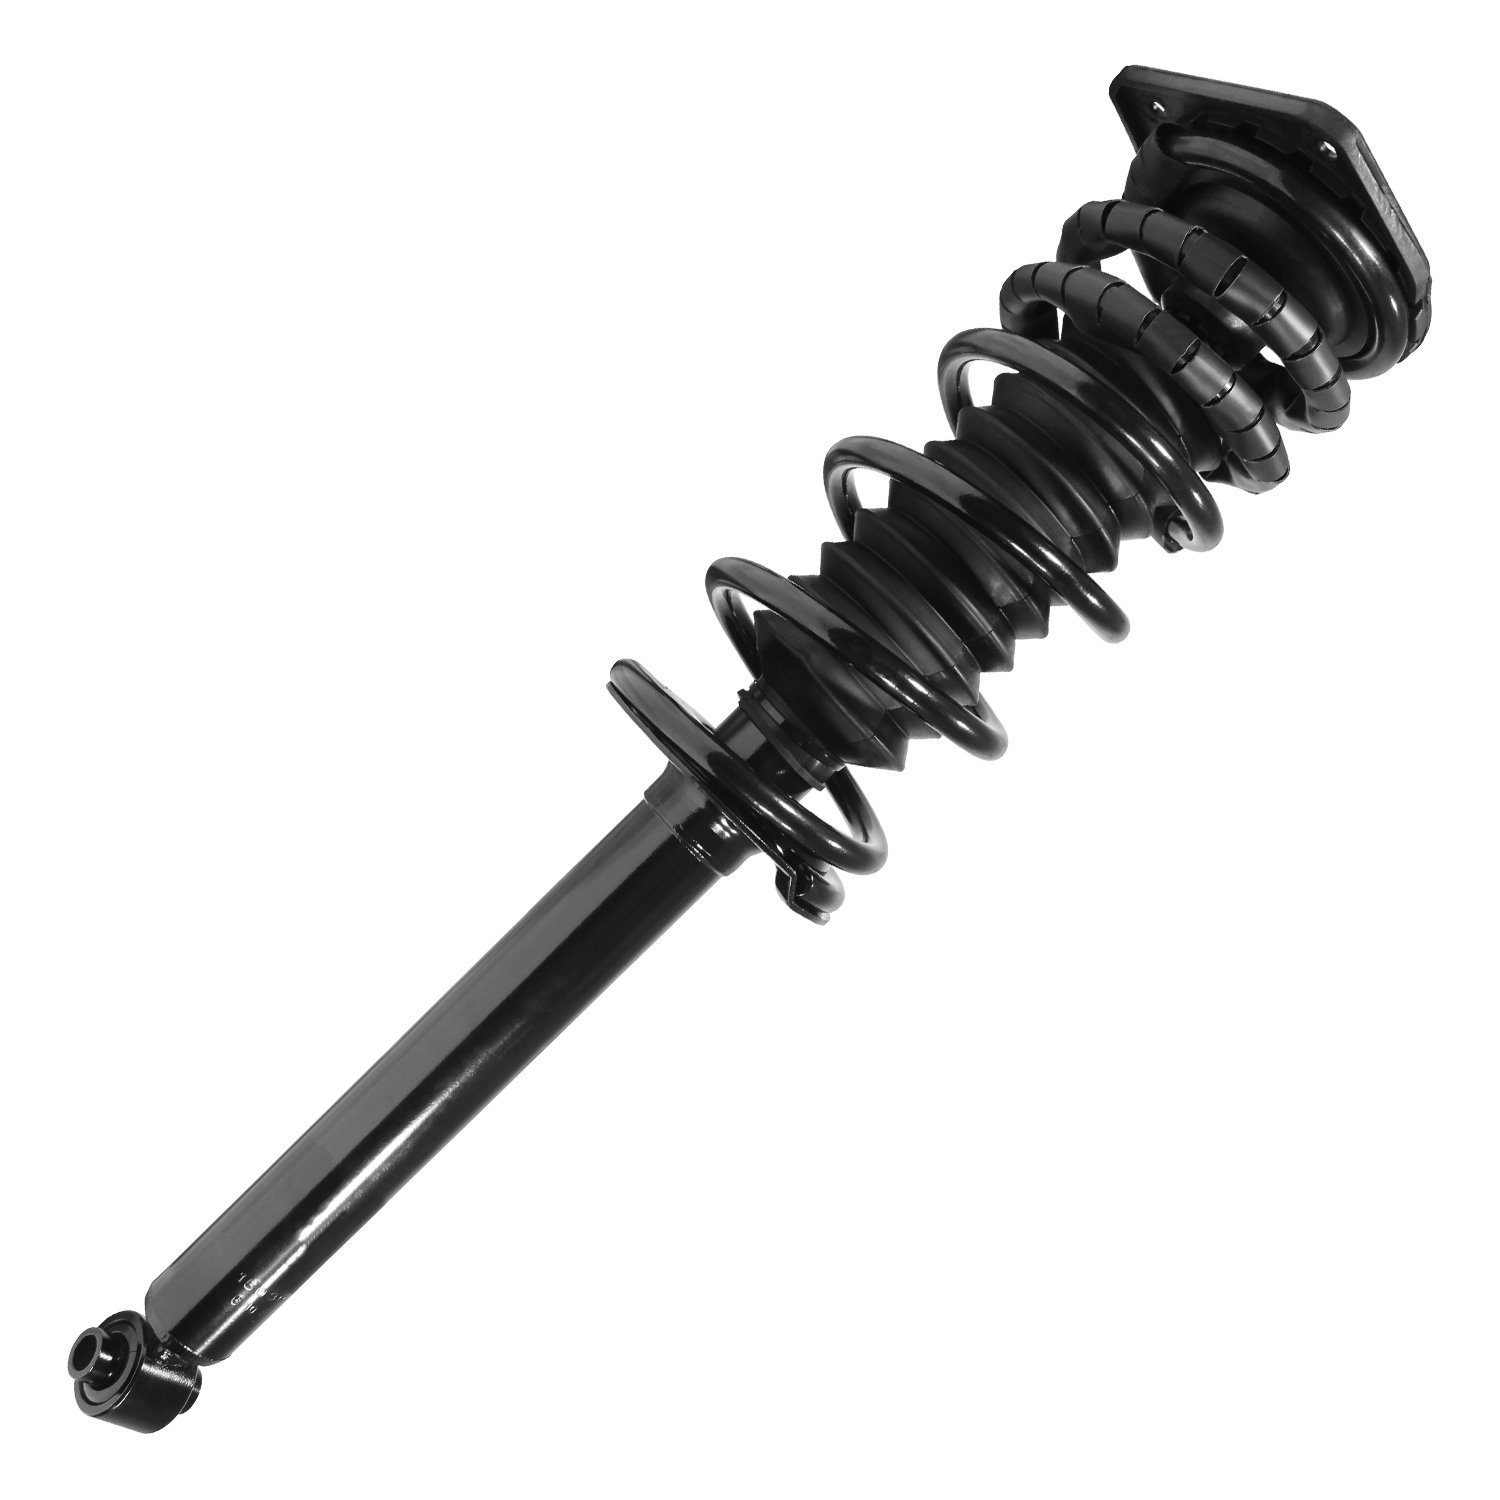 15030 Suspension Strut & Coil Spring Assembly Fits Select Chevy Cavalier, Pontiac Sunfire